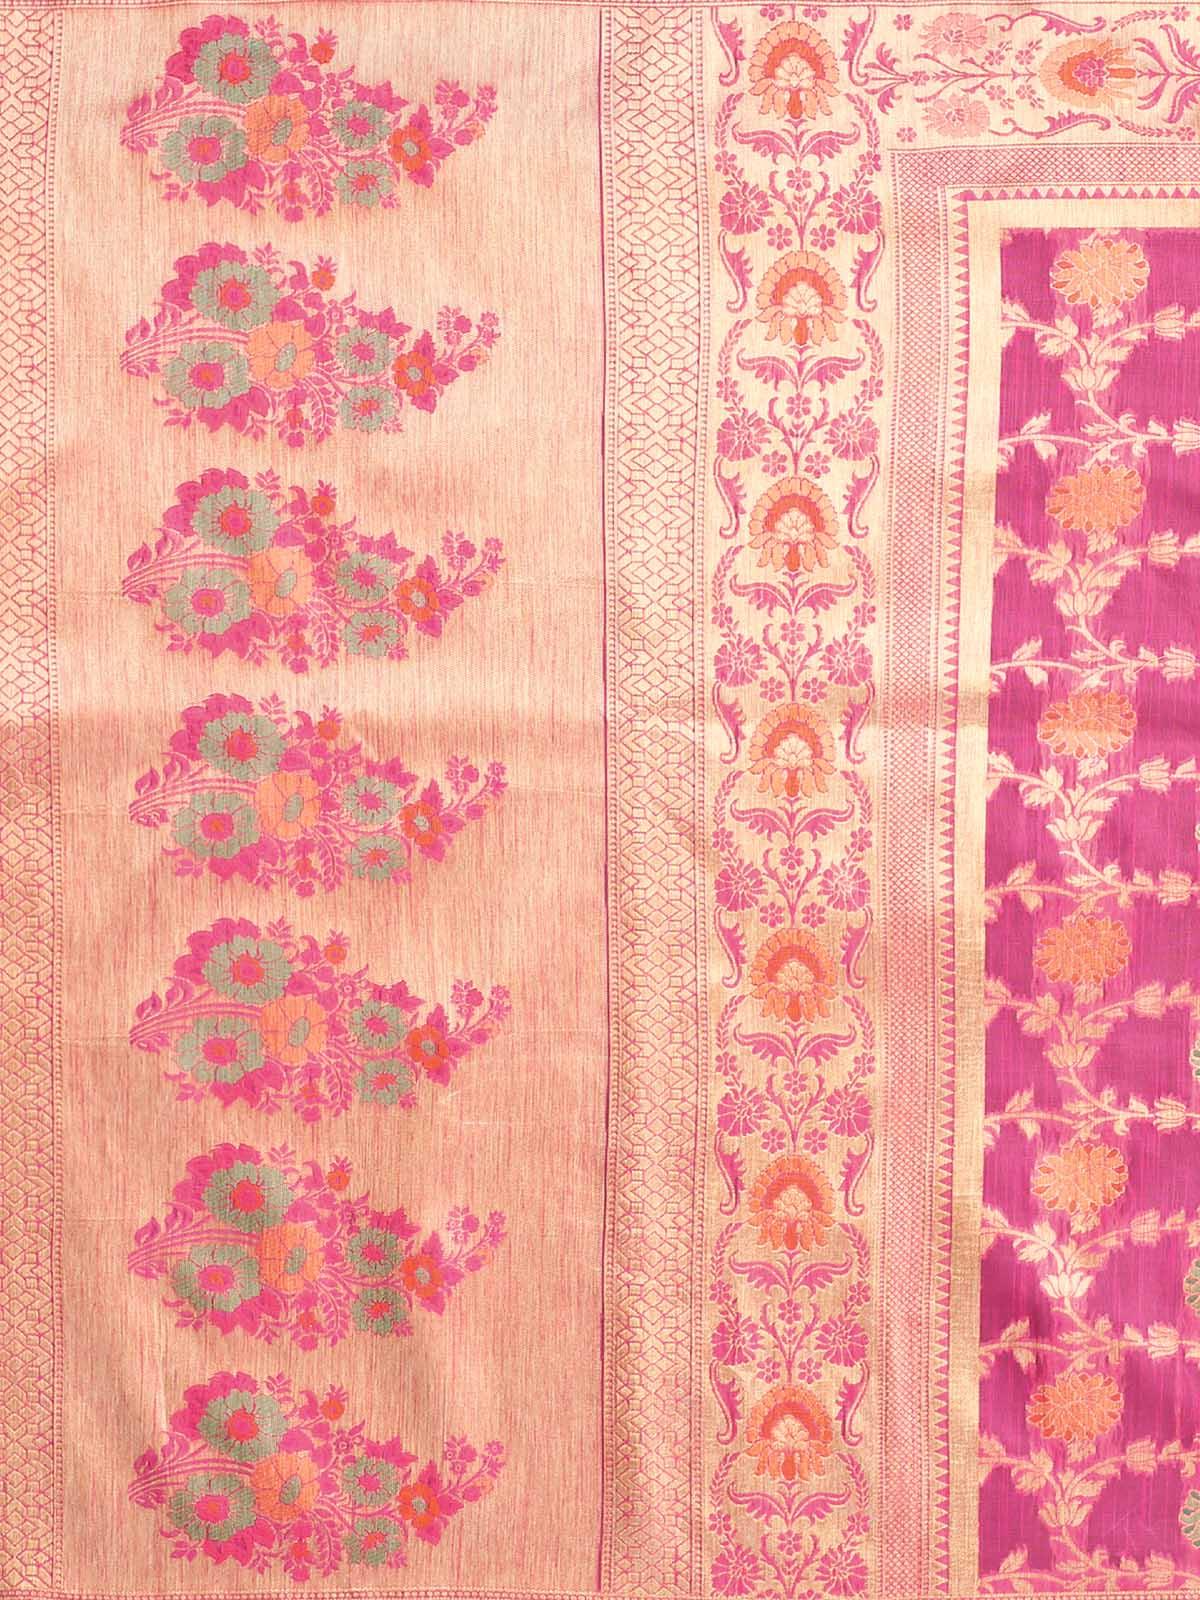 Women's Pink Silk Blend Woven Design Saree With Blouse - Odette